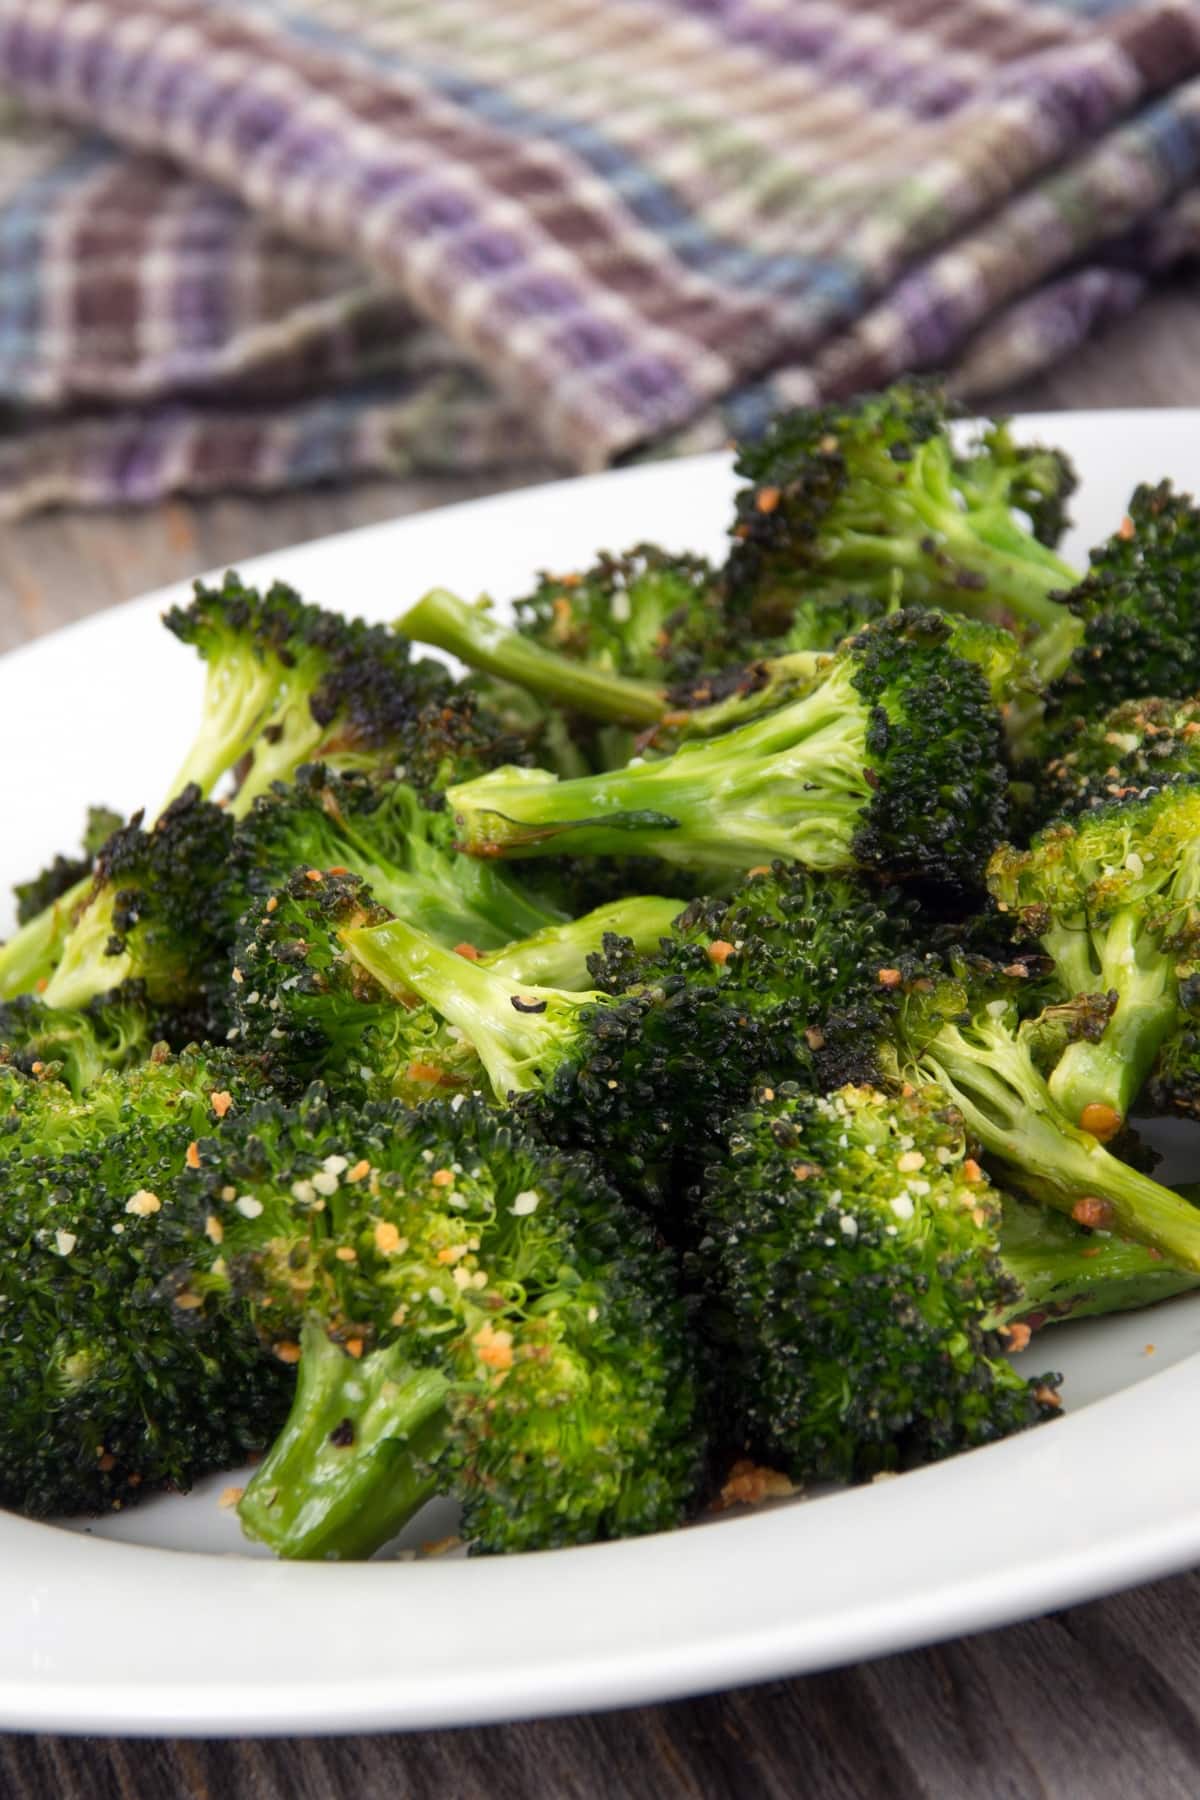 Roasted broccoli florets with parmesan cheese in plate.